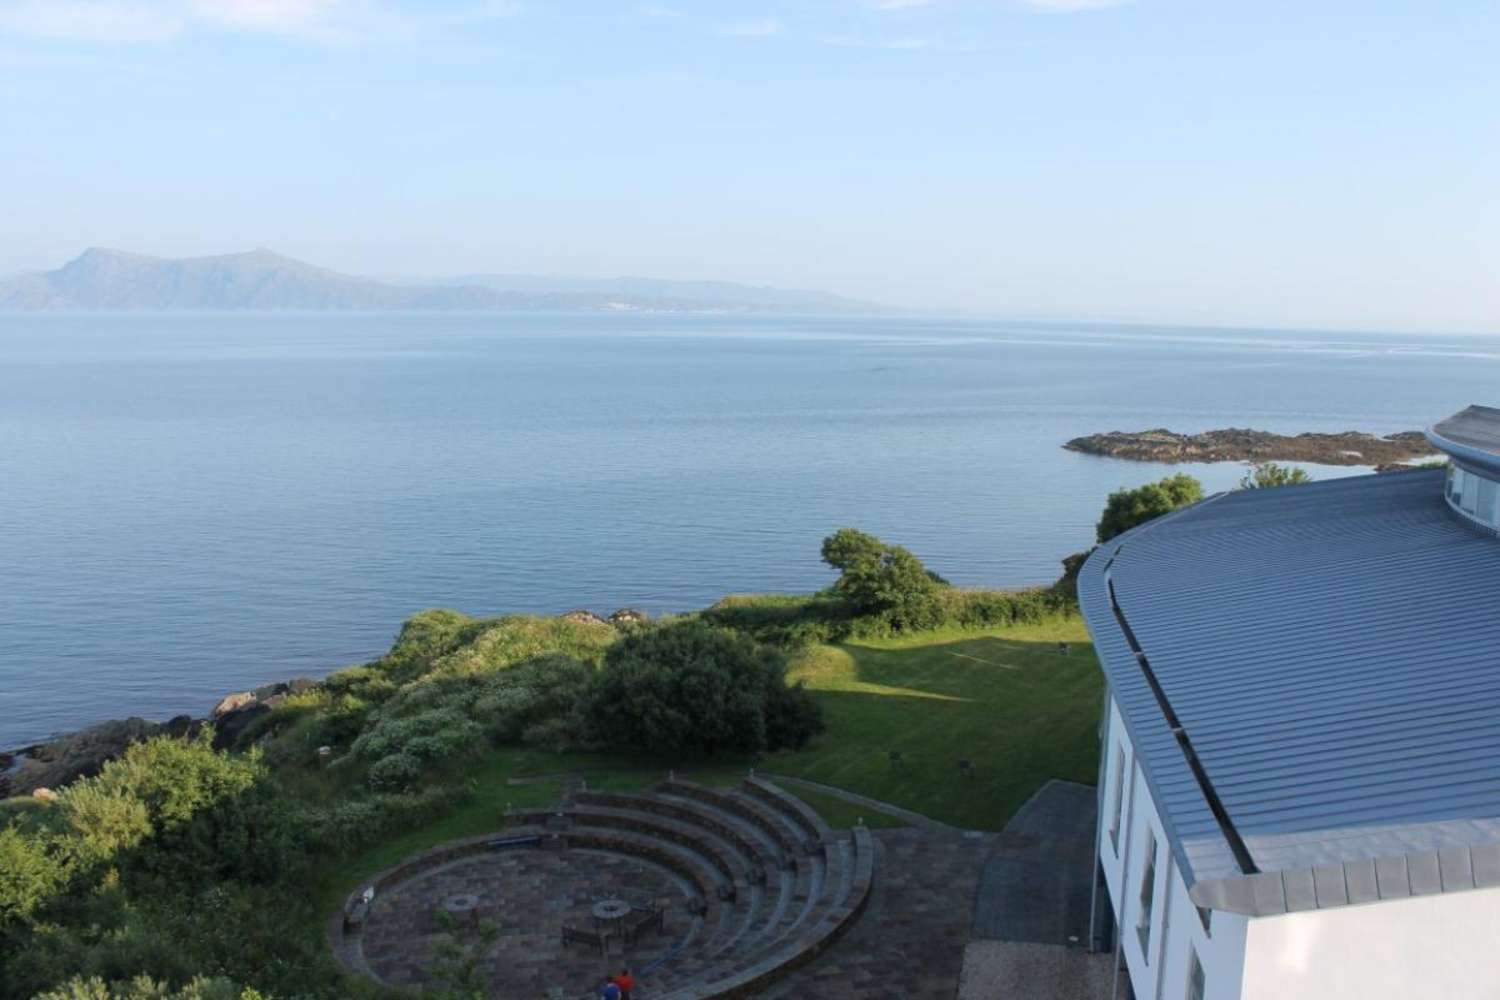 View over the amphitheatre at Sabhal Mor Ostaig on Skye